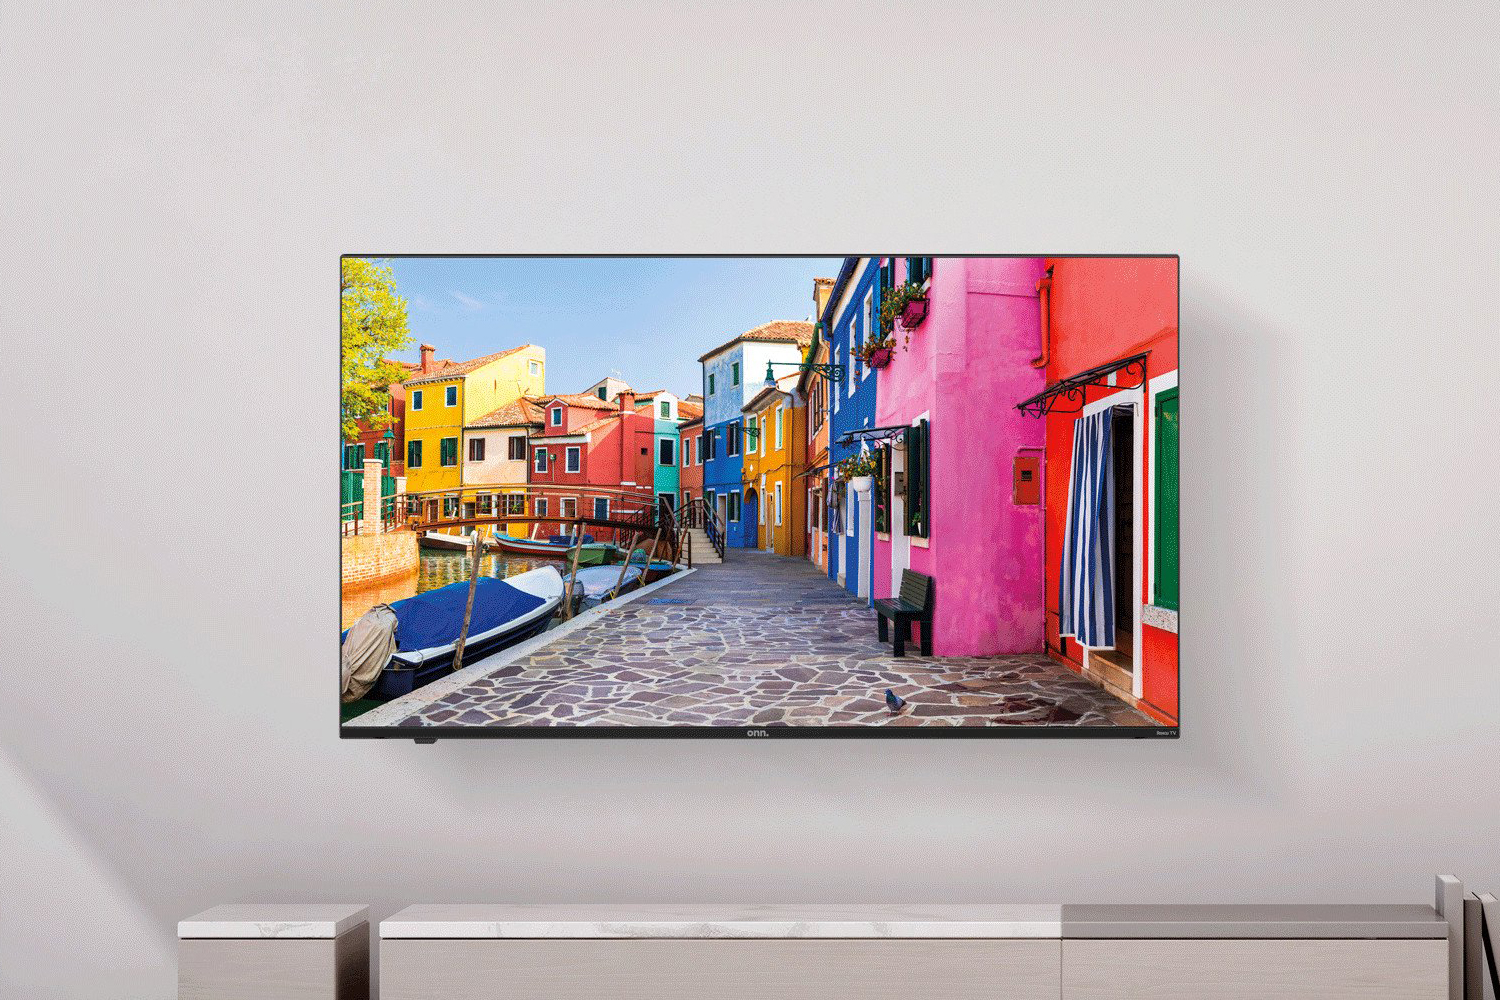 You can get this 65-inch QLED TV for $398 if you're fast